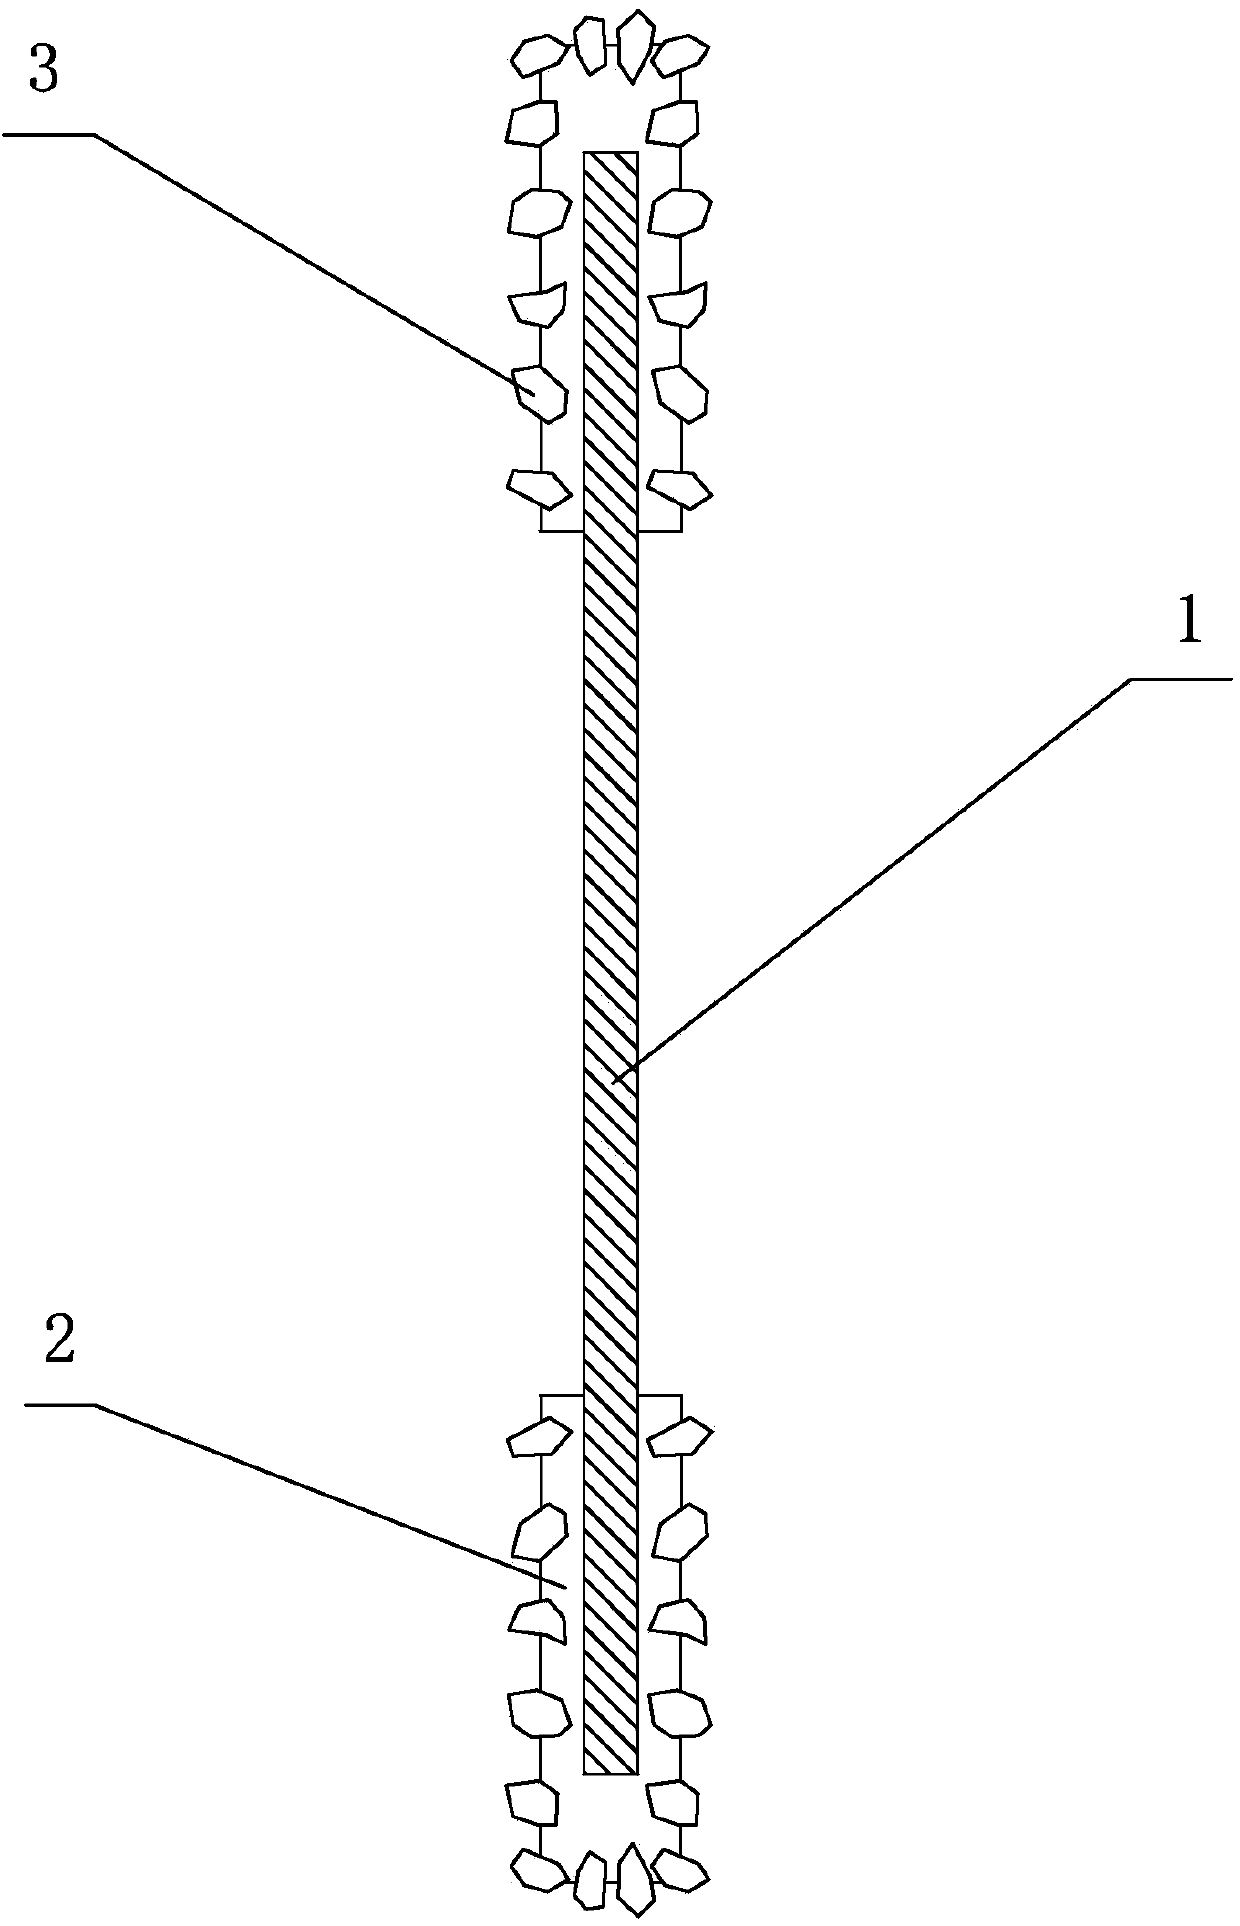 Annular diamond double-blade band saw and manufacturing method thereof